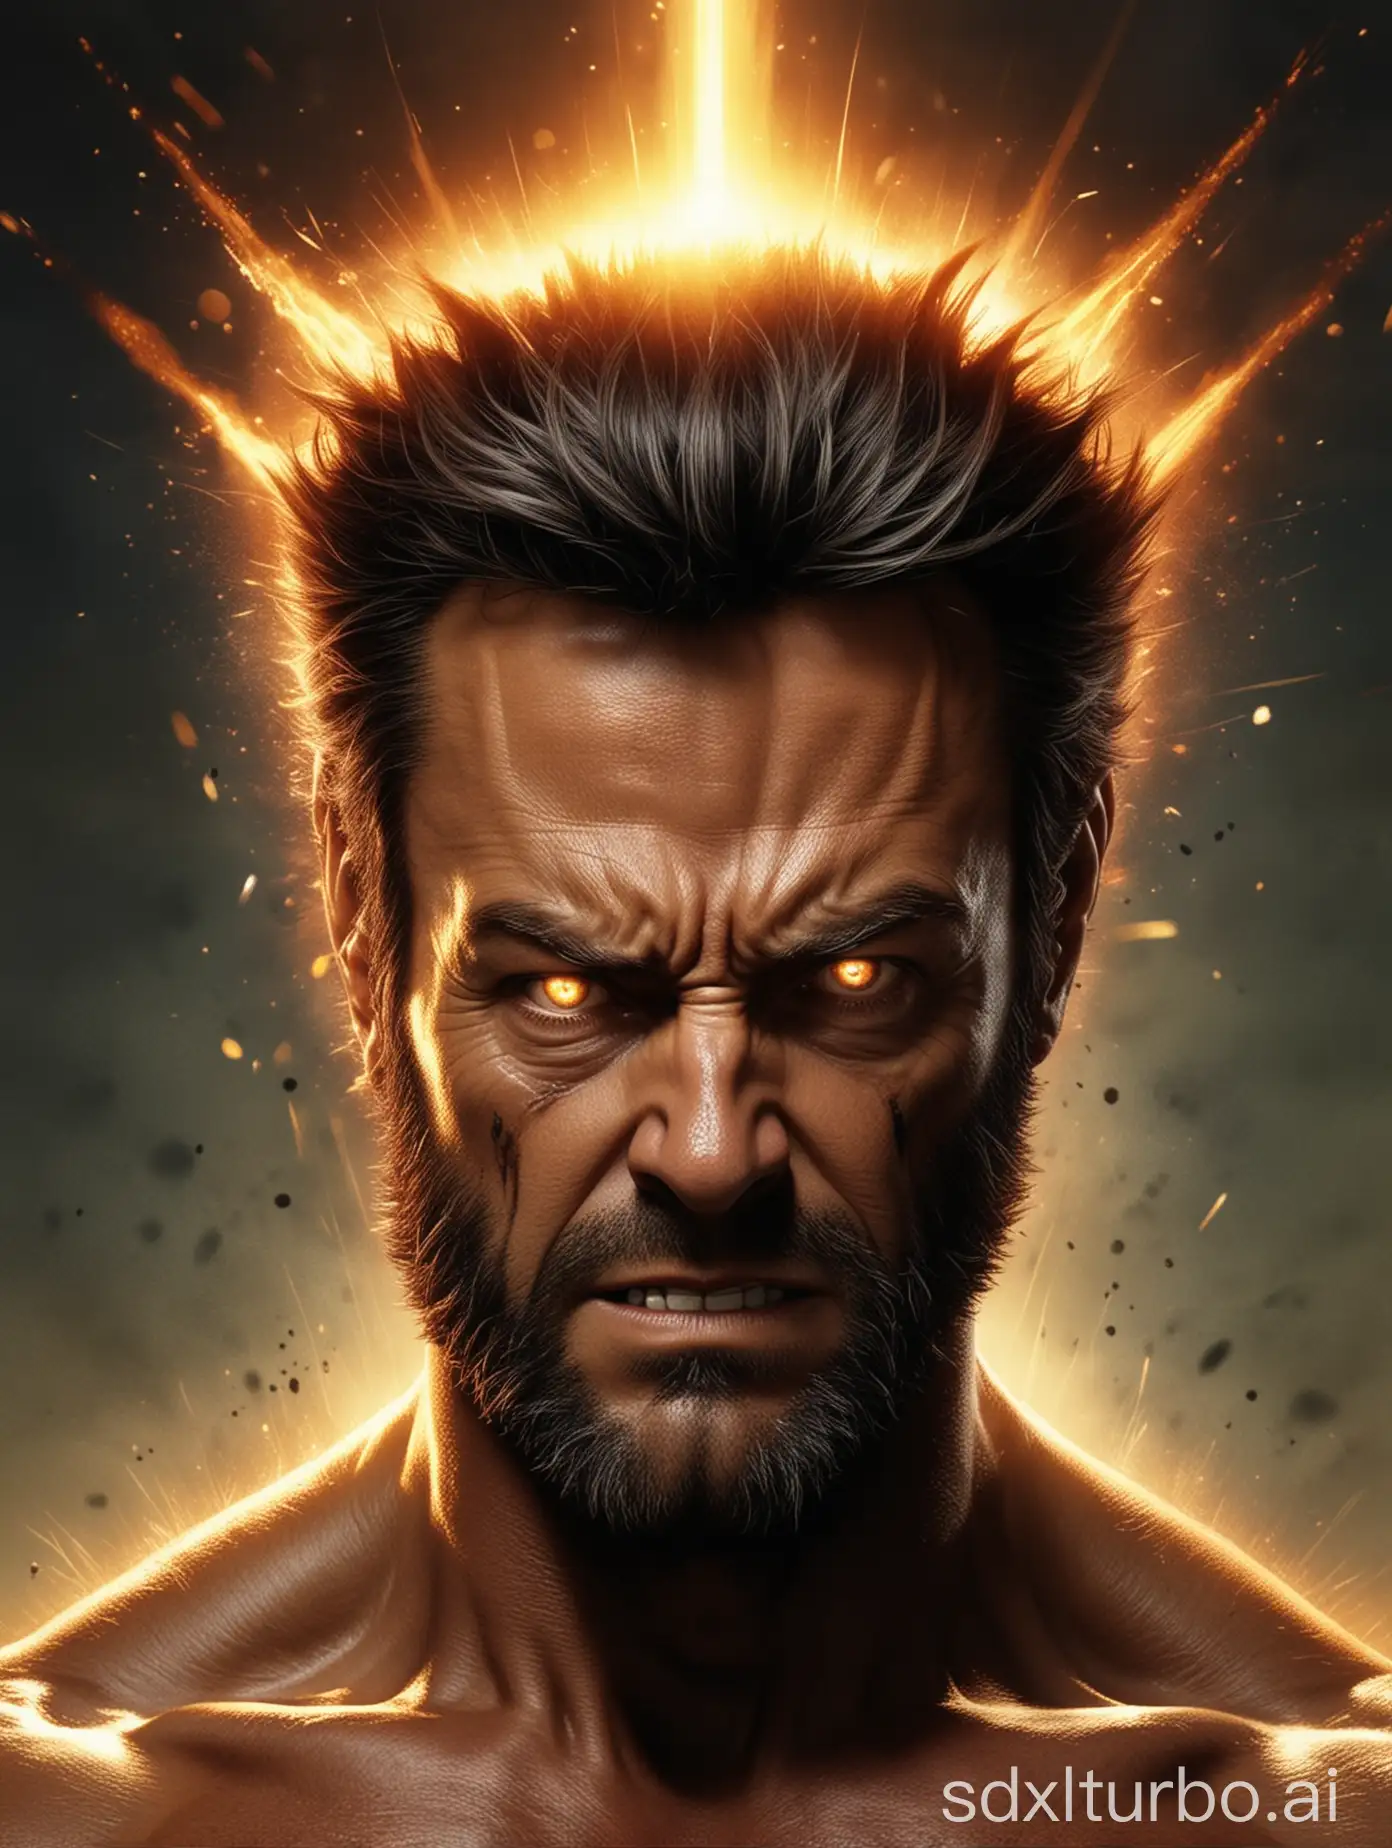 Nuclear explosion on Wolverine's head